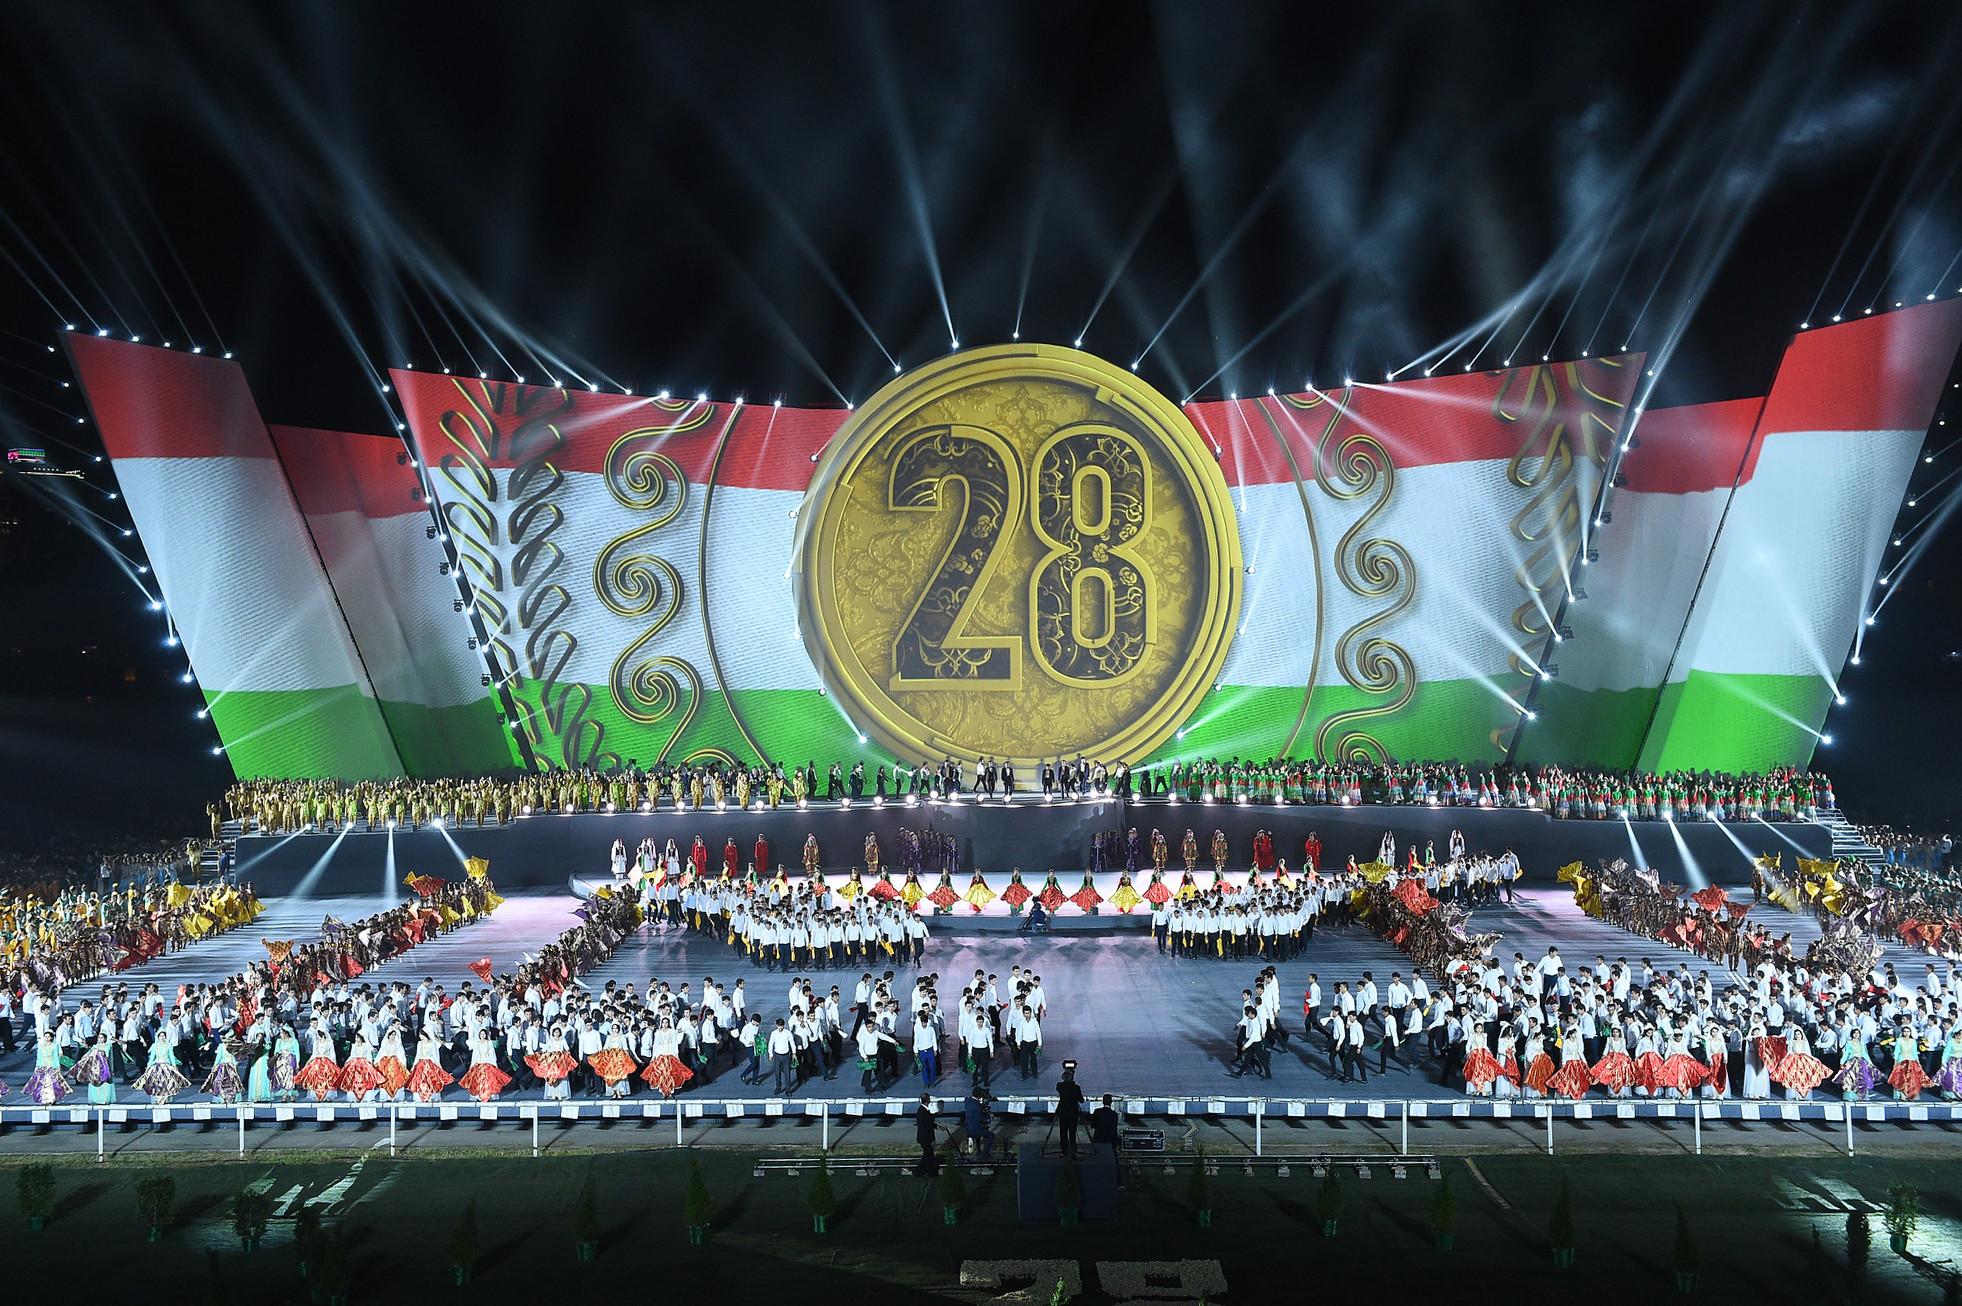 The Republic of Tajikistan Independence Day